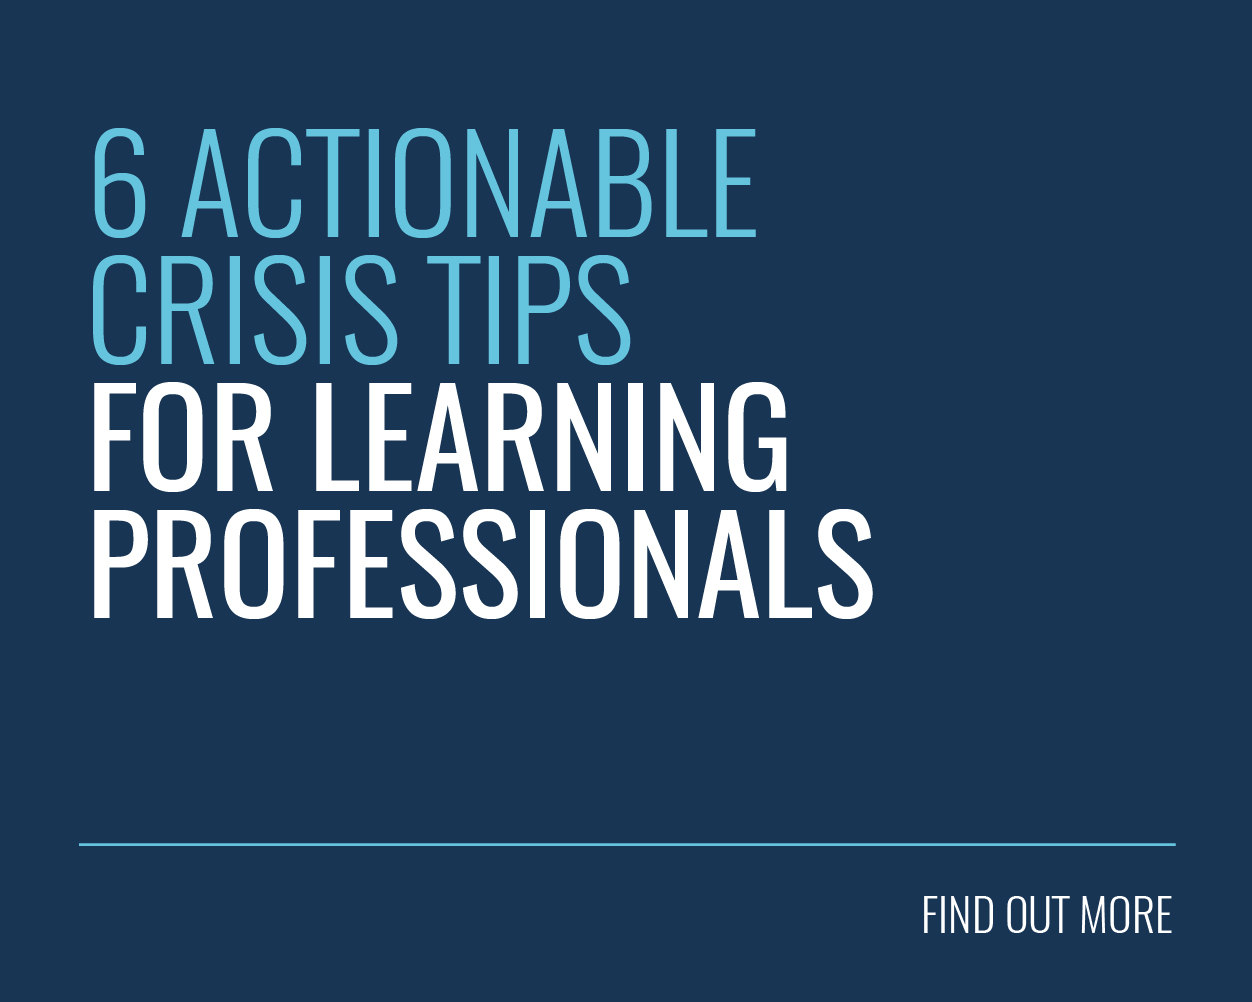 6 Actionable Crisis Tips for Learning Professionals